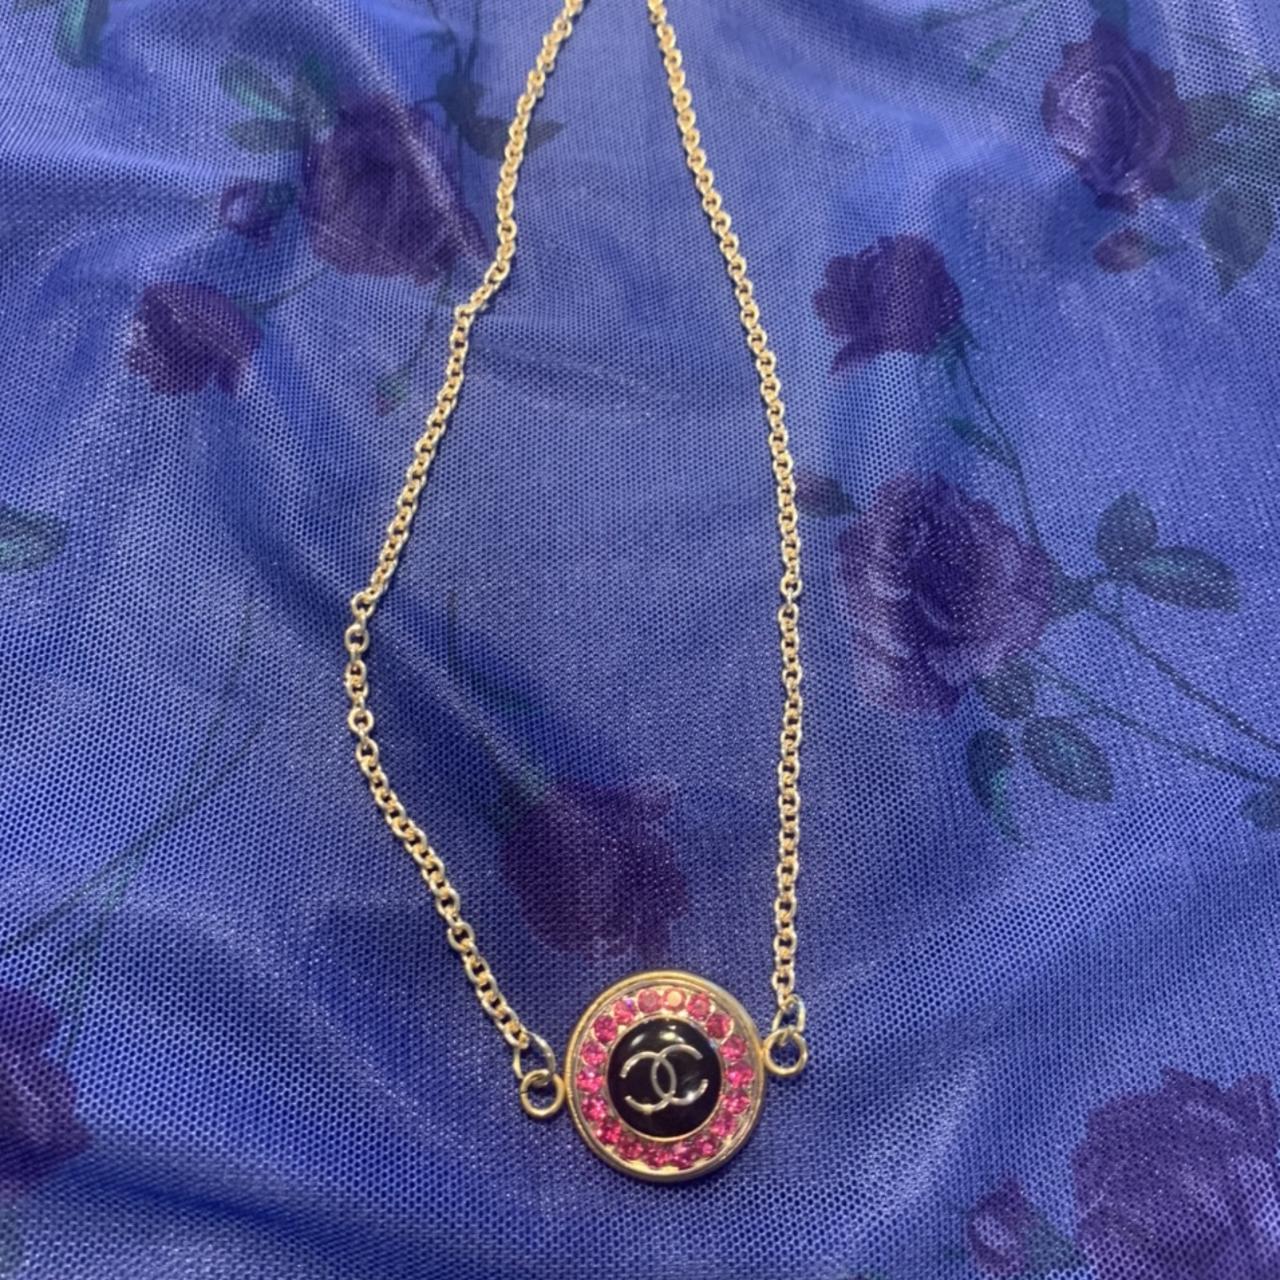 Pink black and gold repurposed Chanel button - Depop